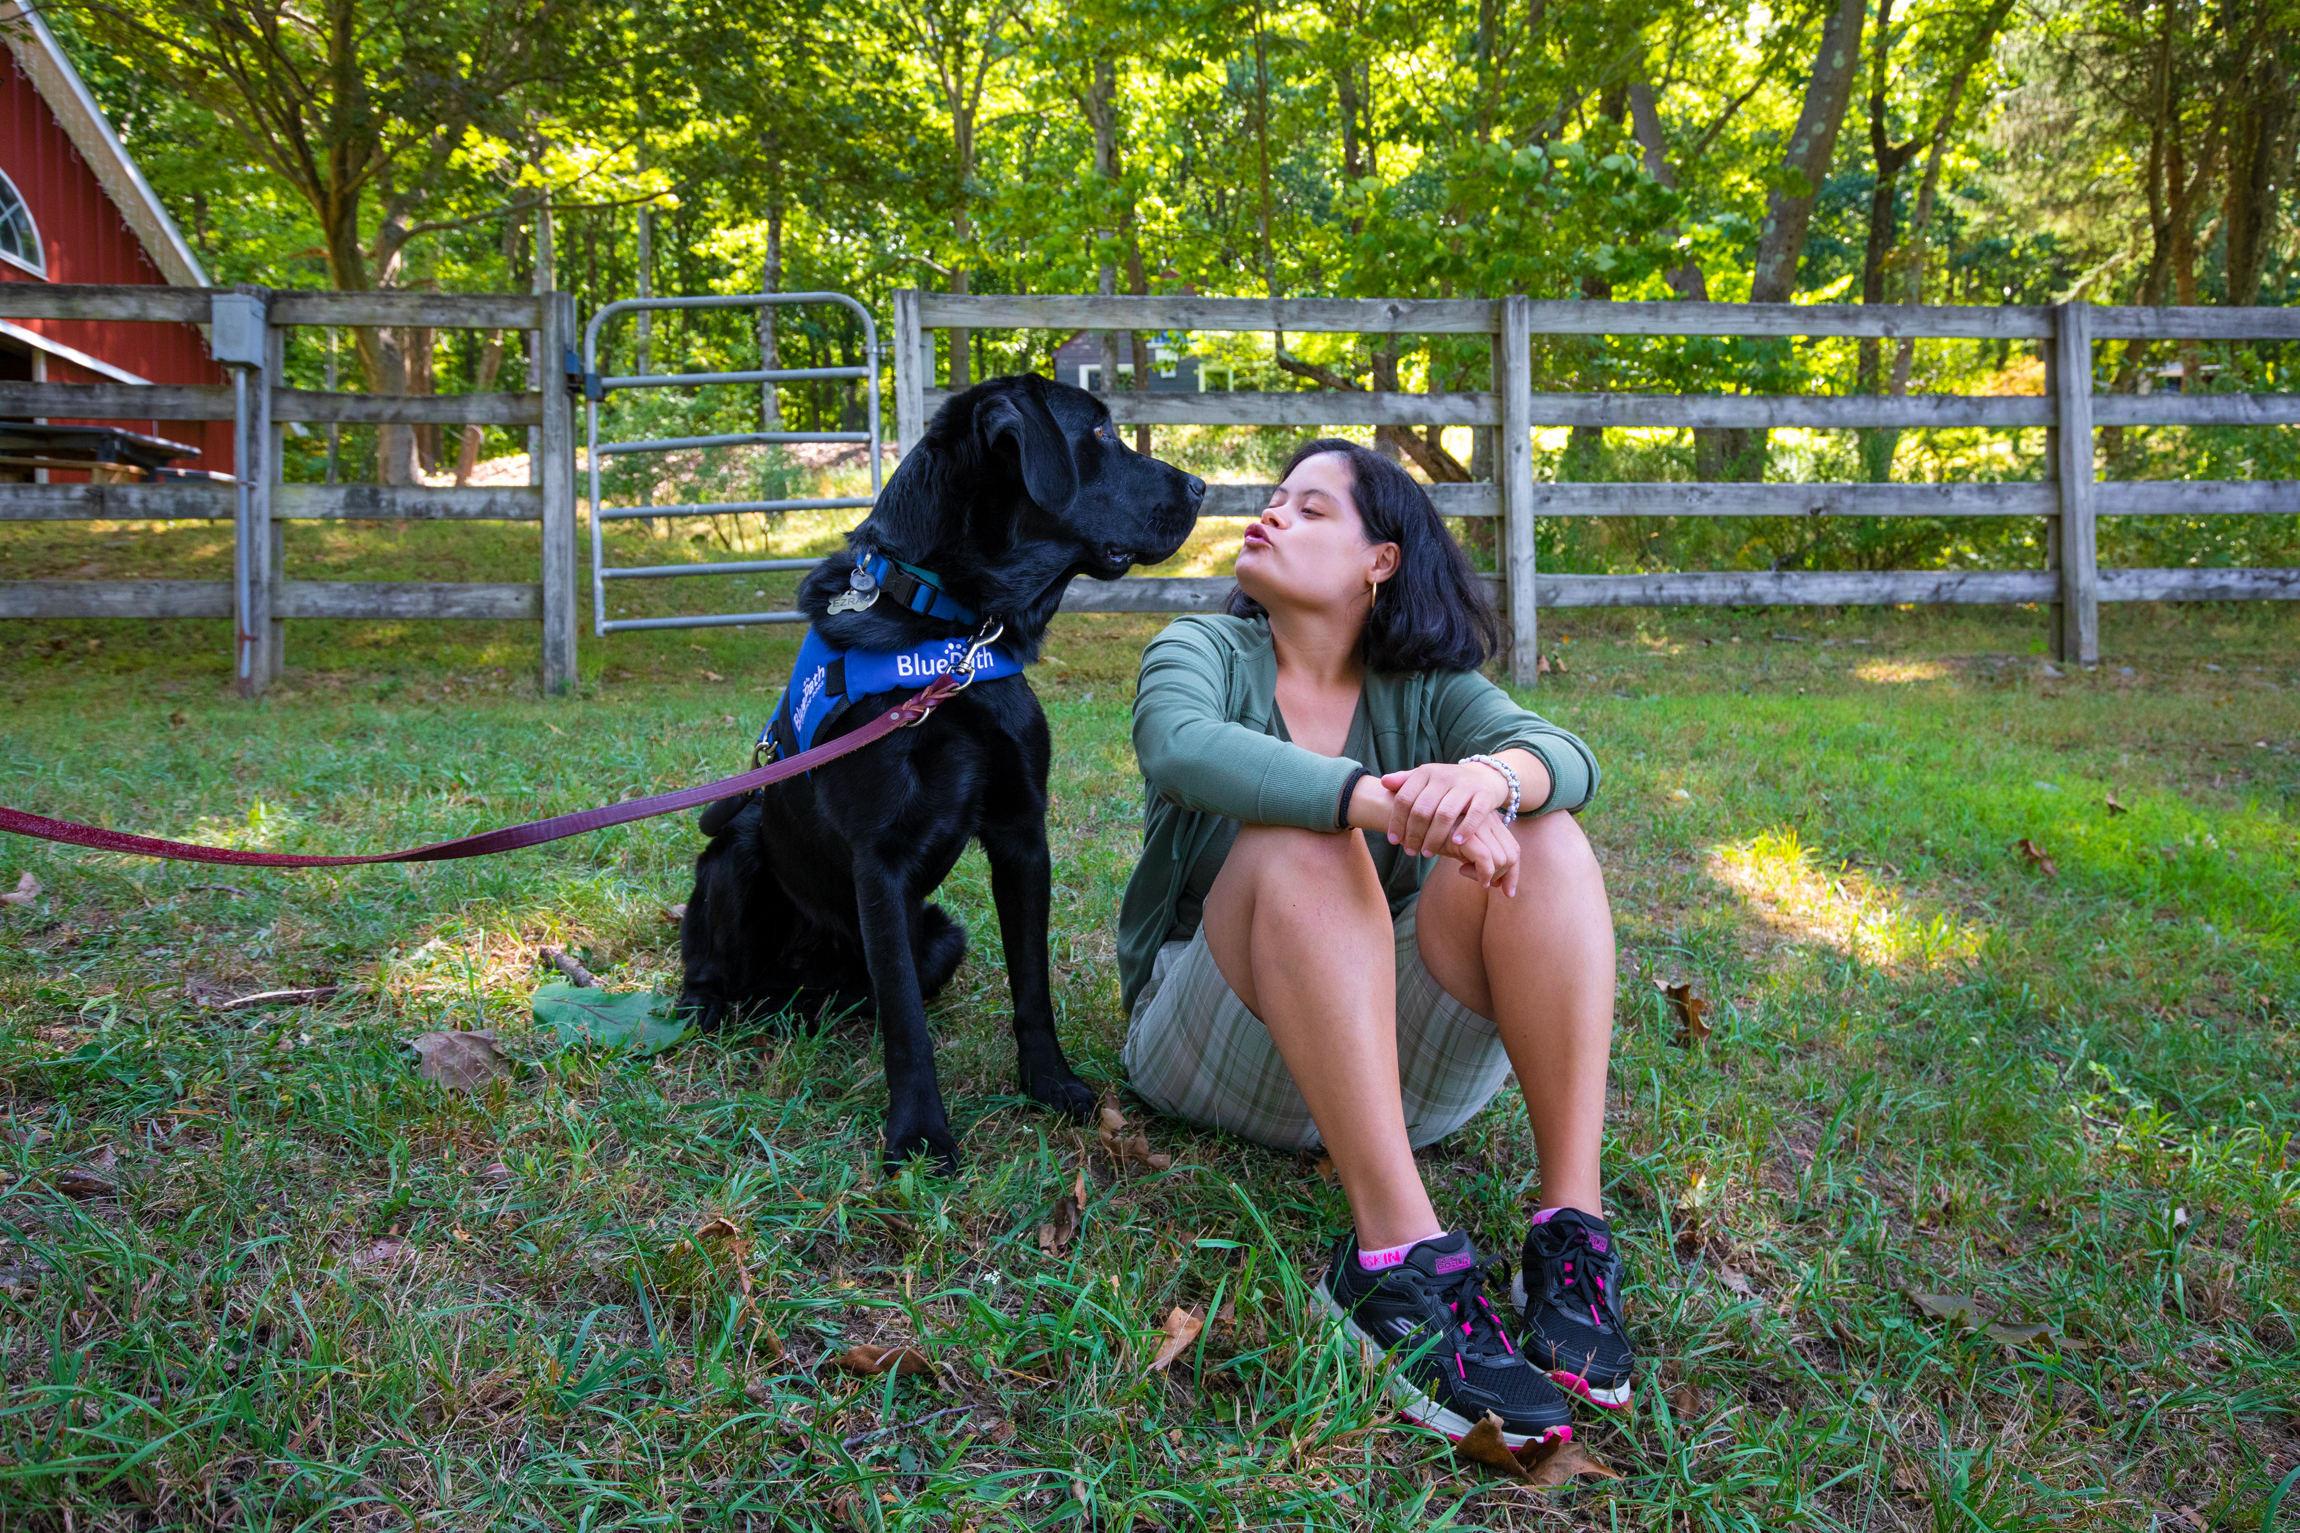 BluePath autism service dog sits with woman on the farm.